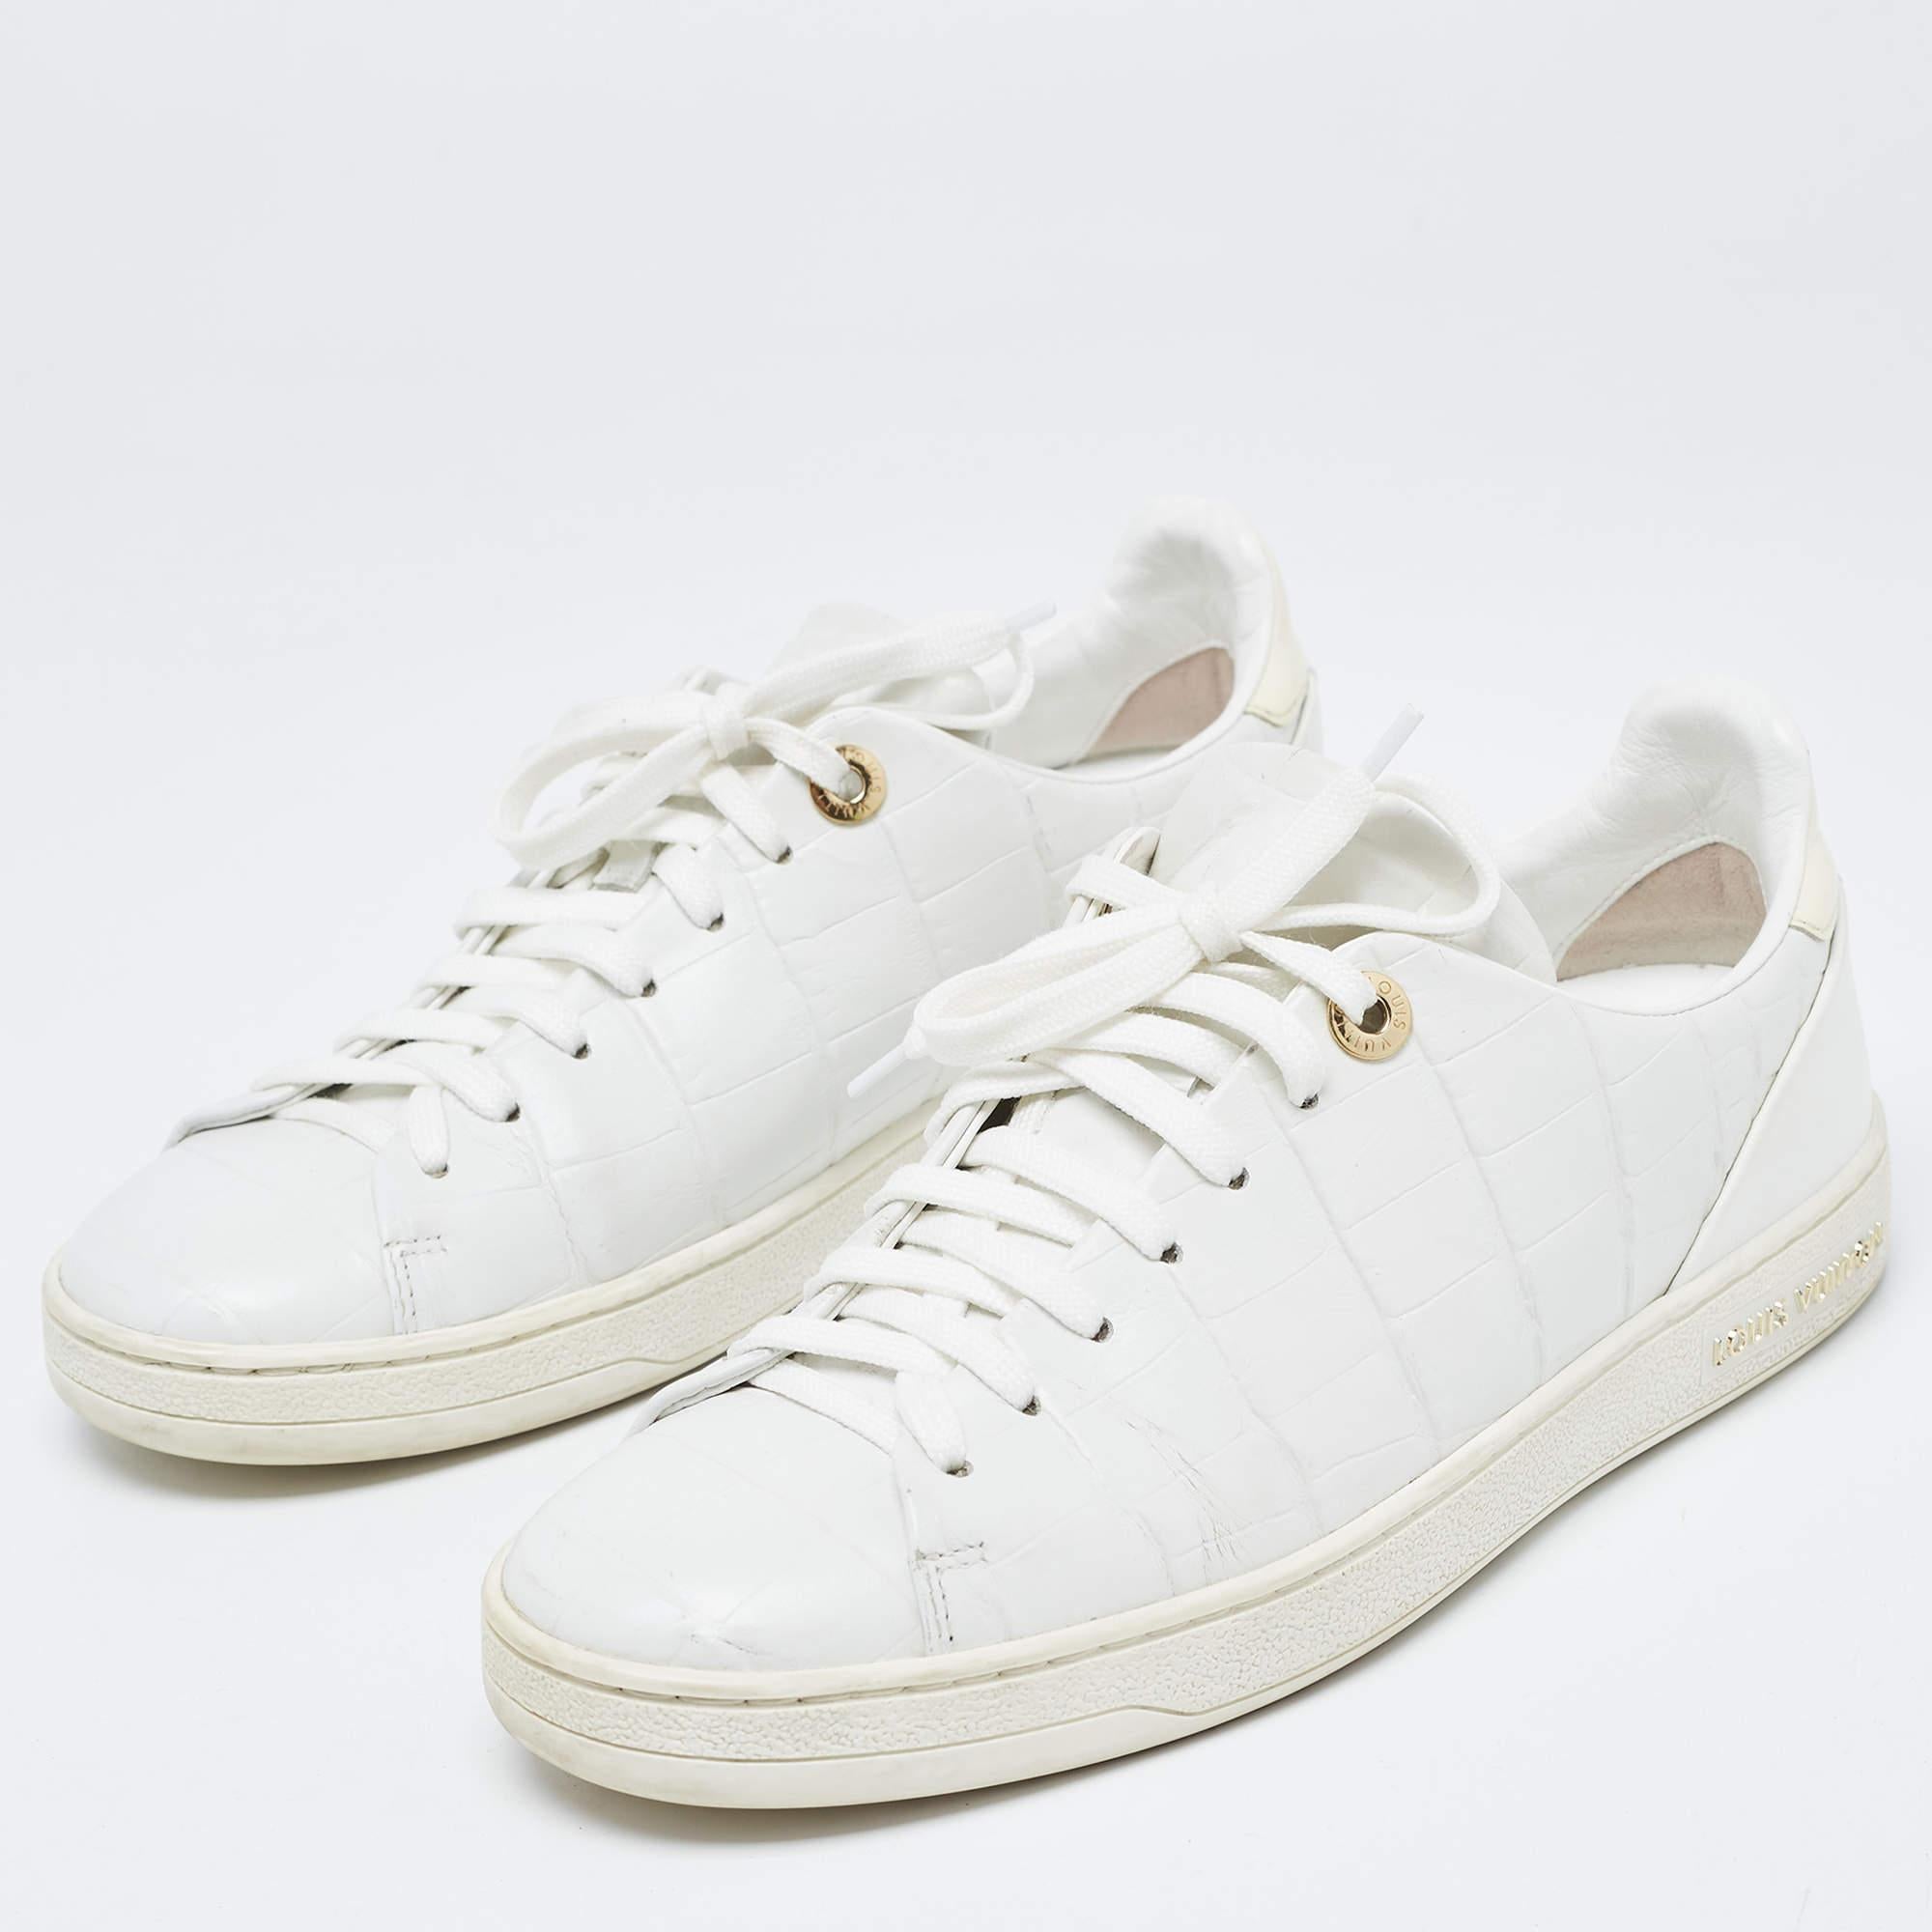 Coming in a classic silhouette, these designer sneakers are a seamless combination of luxury, comfort, and style. These sneakers are designed with signature details and comfortable insoles.

